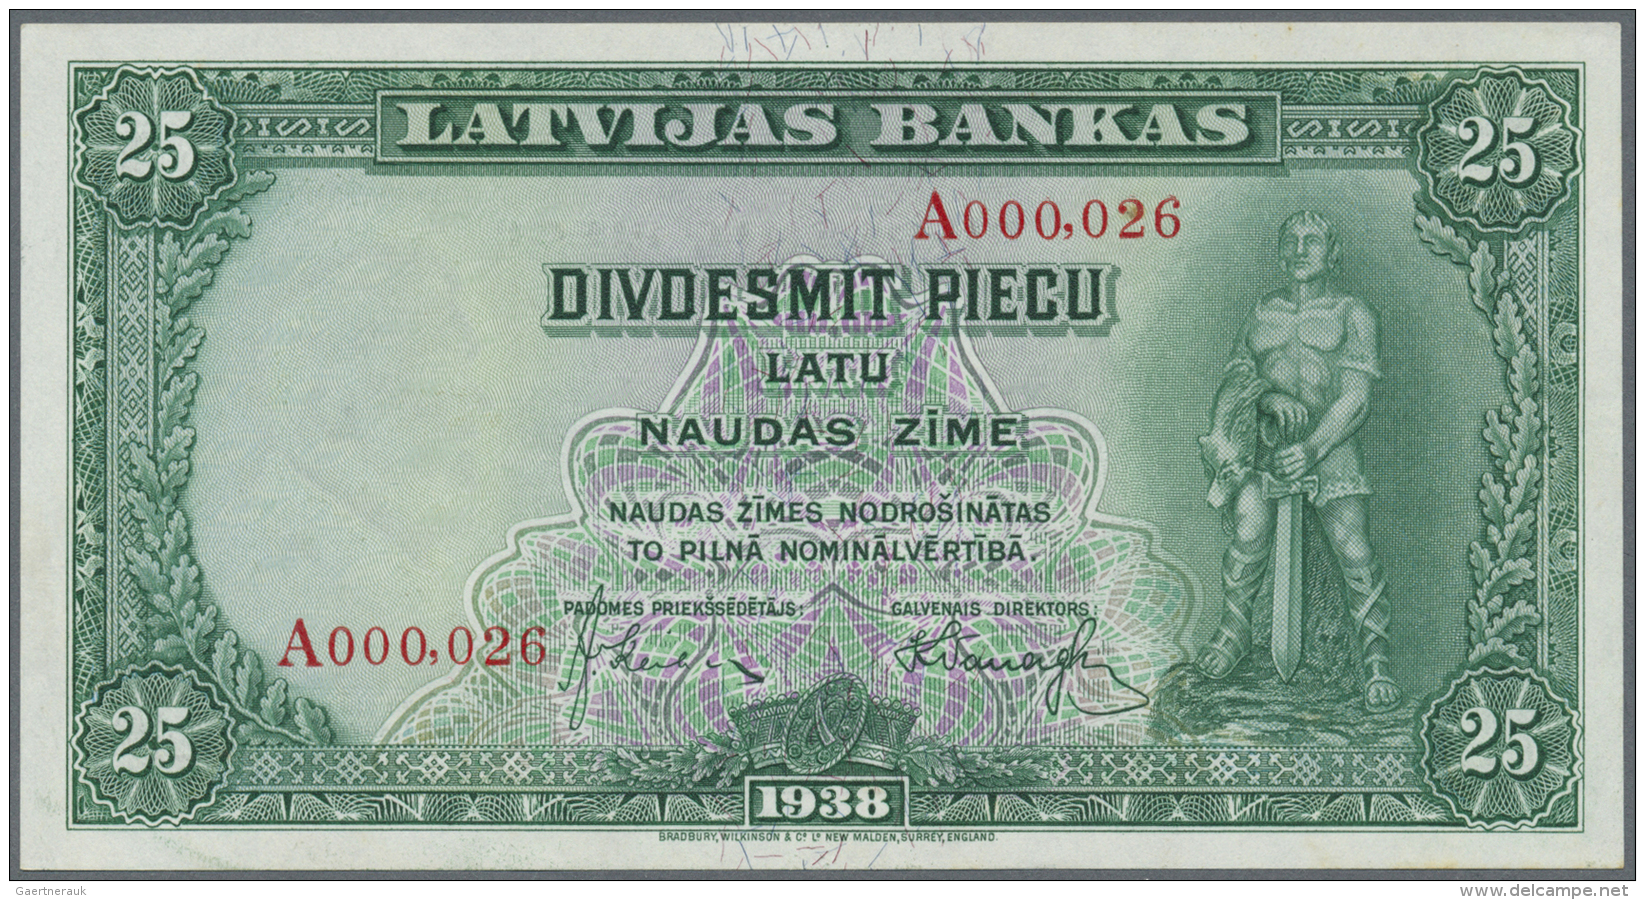 Latvia /Lettland: 25 Latu 1938 P. 21, Issued Note, Series A, Low Serial #A000.026, Only One Very Light Corner Dint, Othe - Lettonie